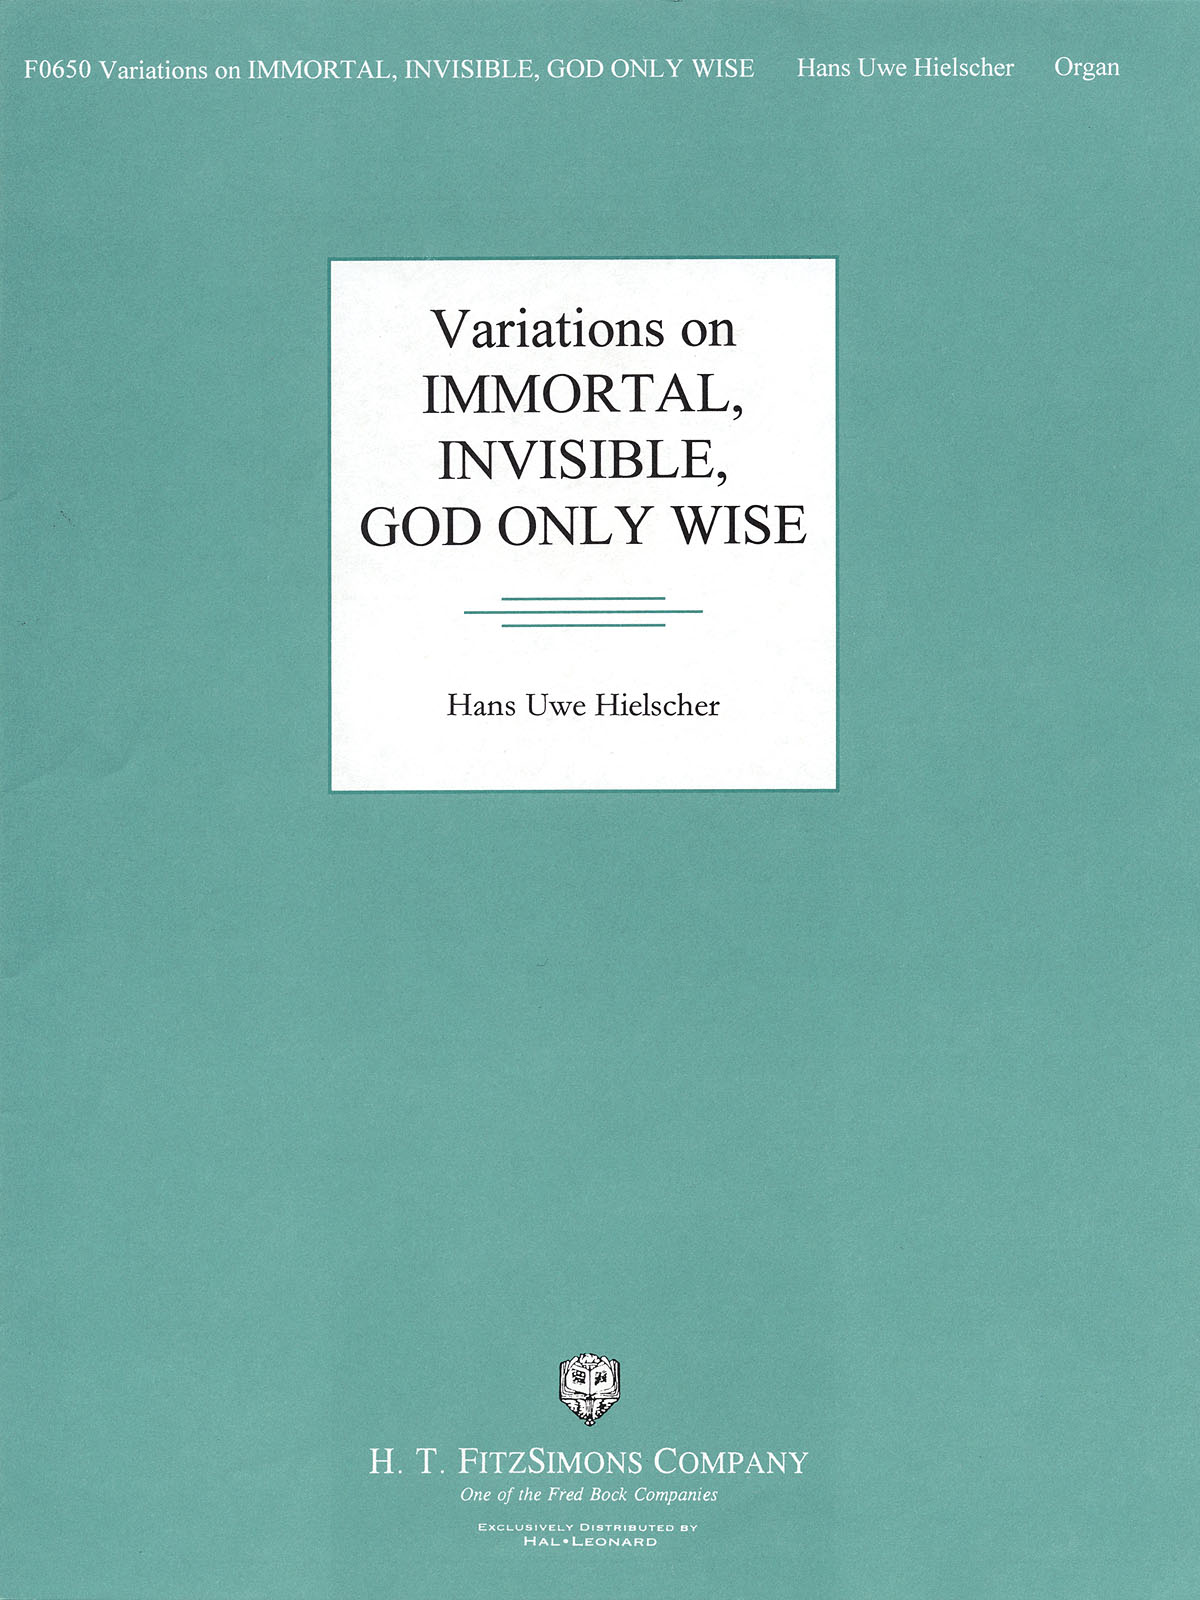 Hans Uwe Hielscher: Variations on Immortal  Invisible  God Only Wise: Organ: